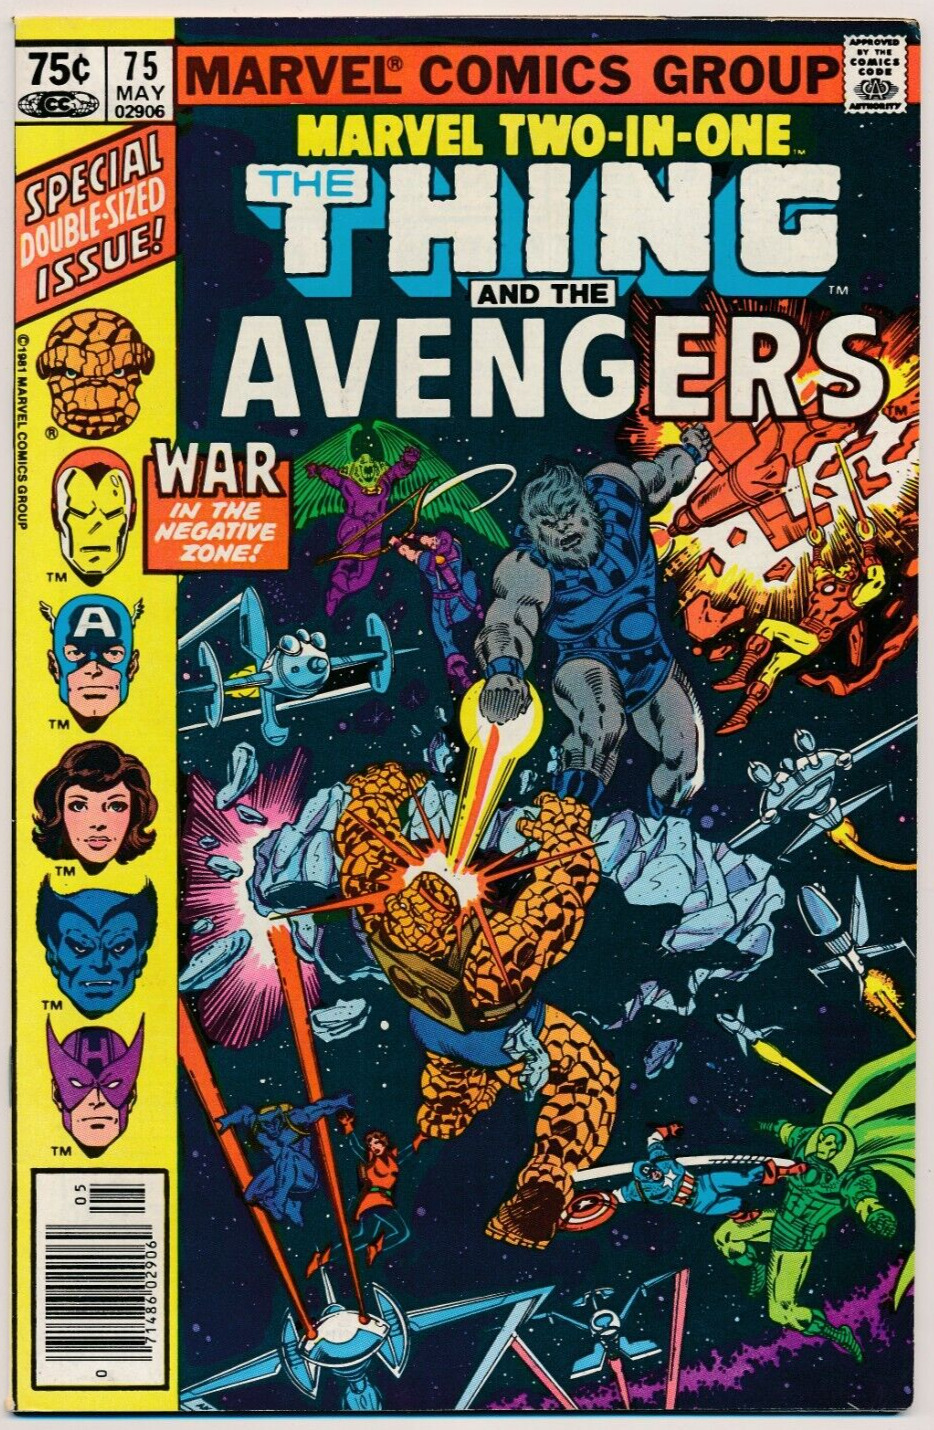 Marvel Two-In-One (Marvel, 1974 series) #75 NM Thing and The Avengers